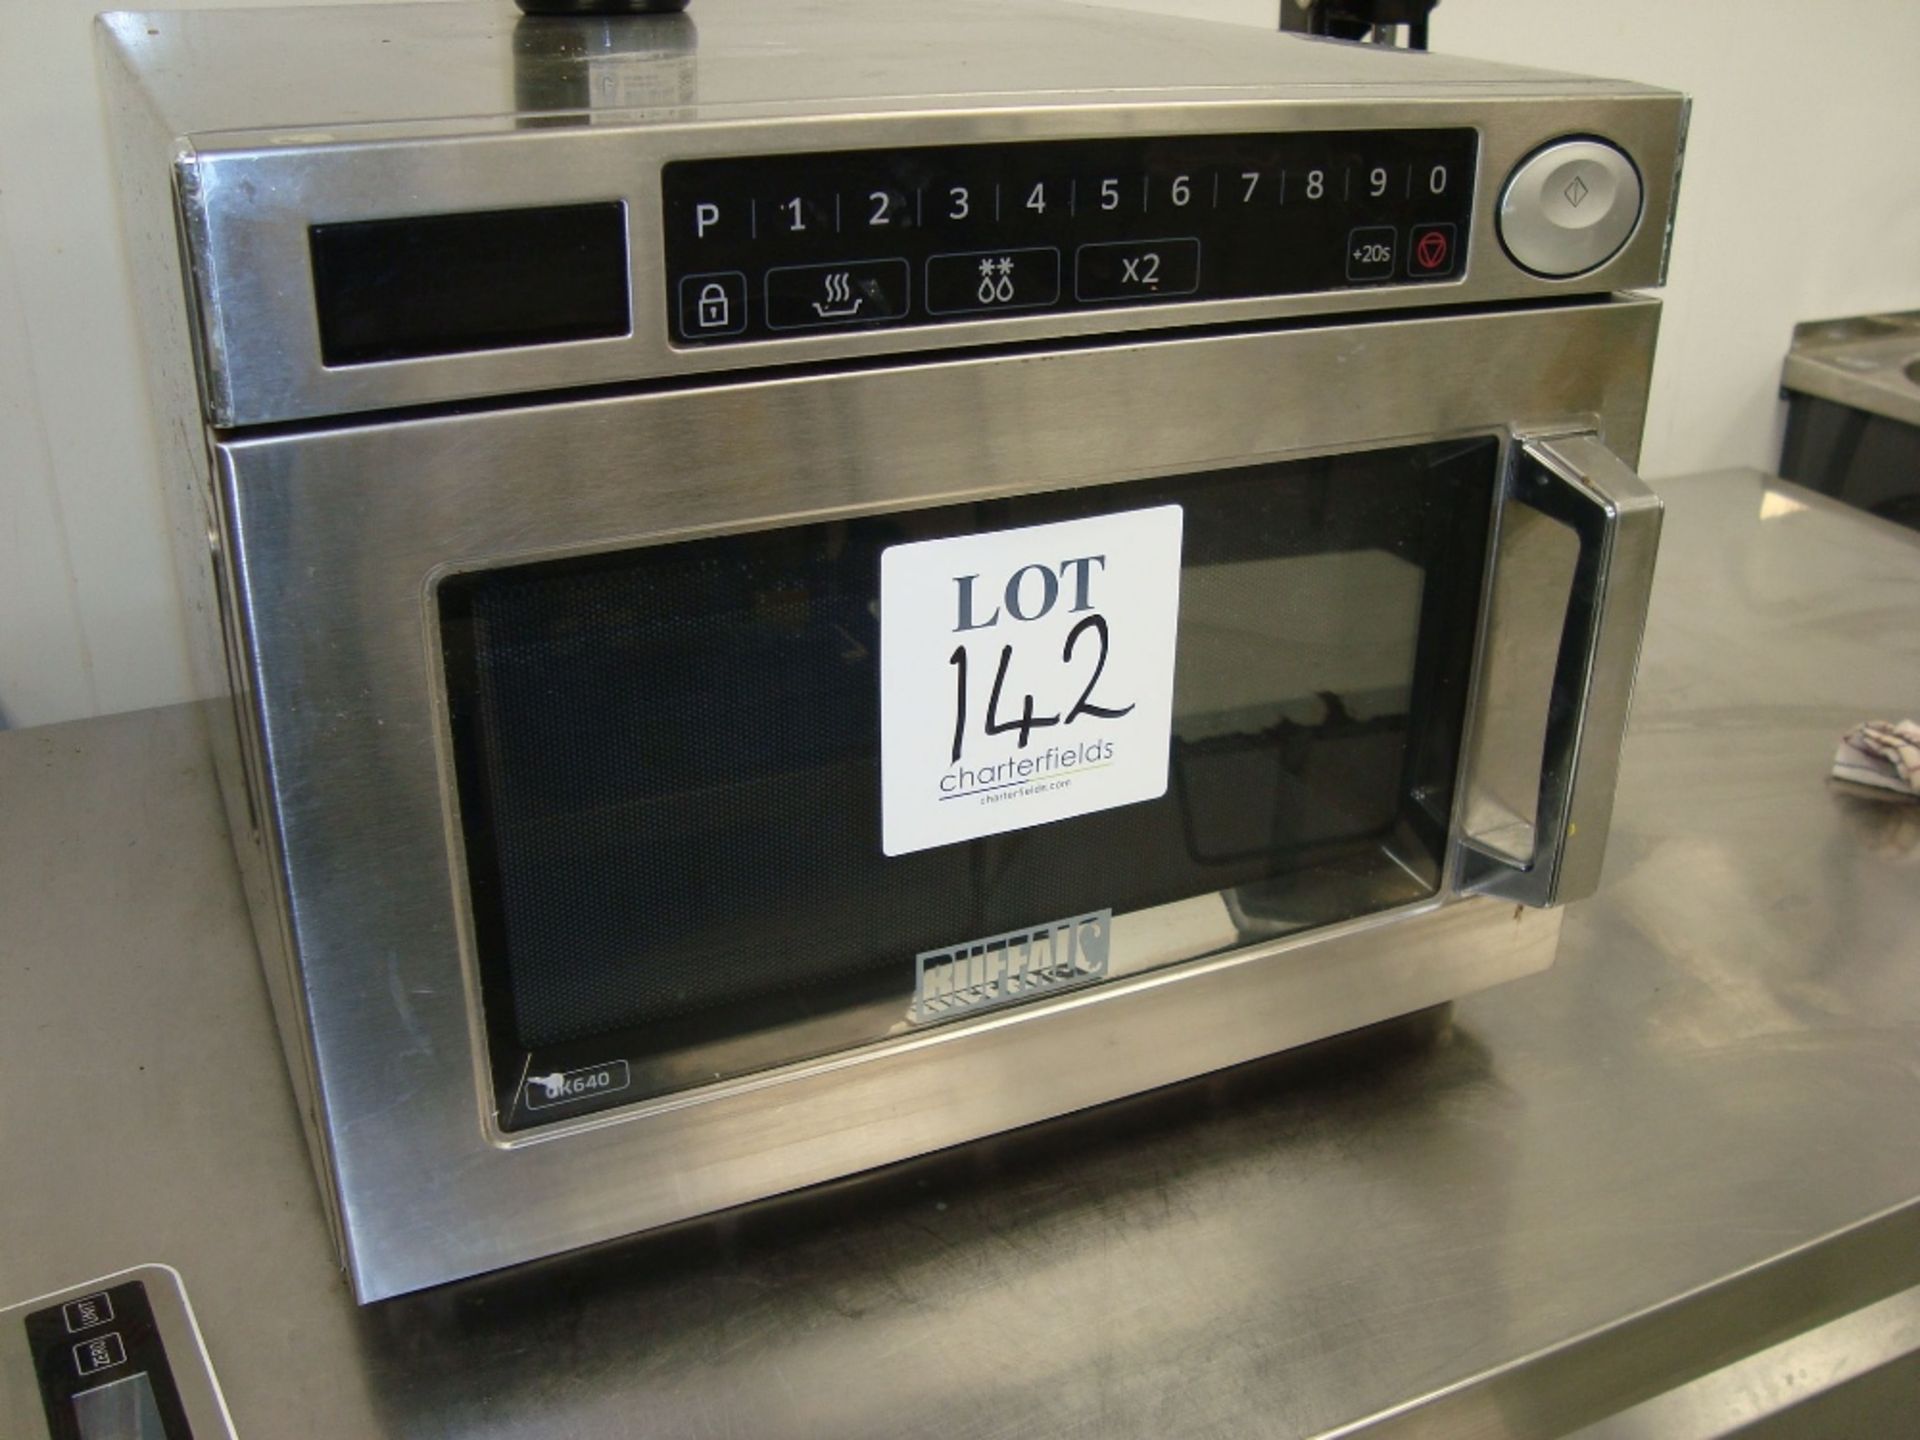 A Buffalo stainless steel commercial microwave oven